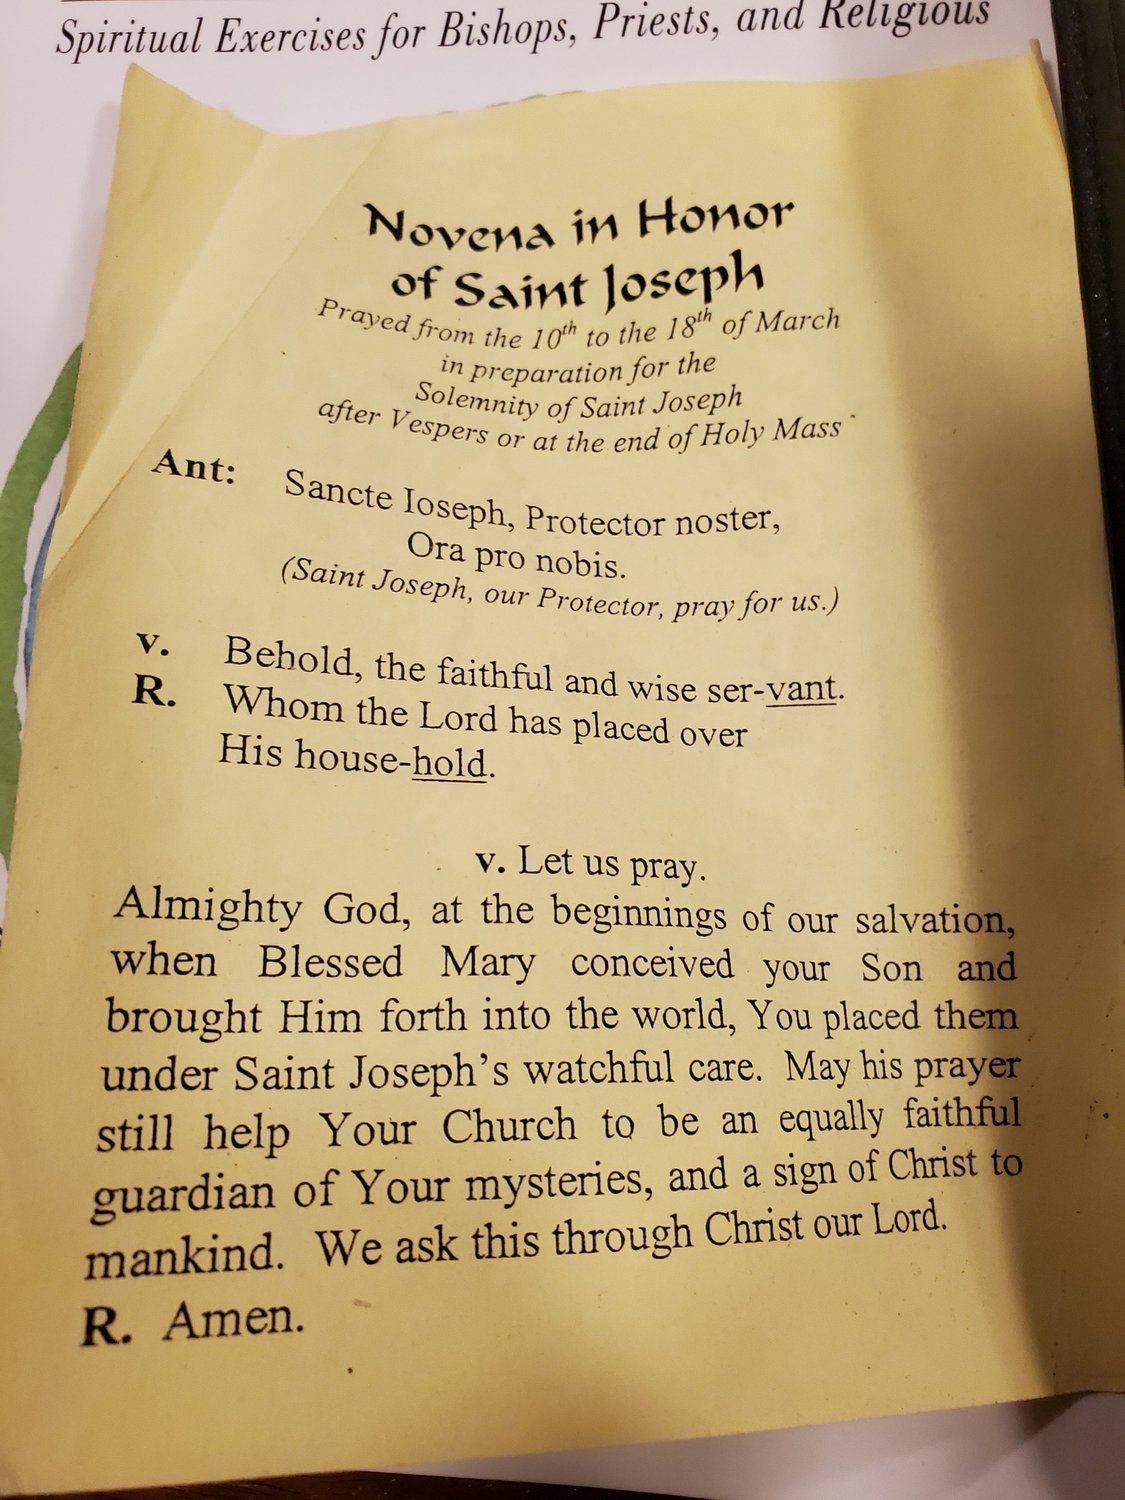 This sheet of paper recently fell out of Bishop W. Shawn McKnight's breviary, inspiring him to pray a St. Joseph novena with the people of the Jefferson City diocese in the days leading up to the Solemnity of St. Joseph, Husband of Mary (March 19).